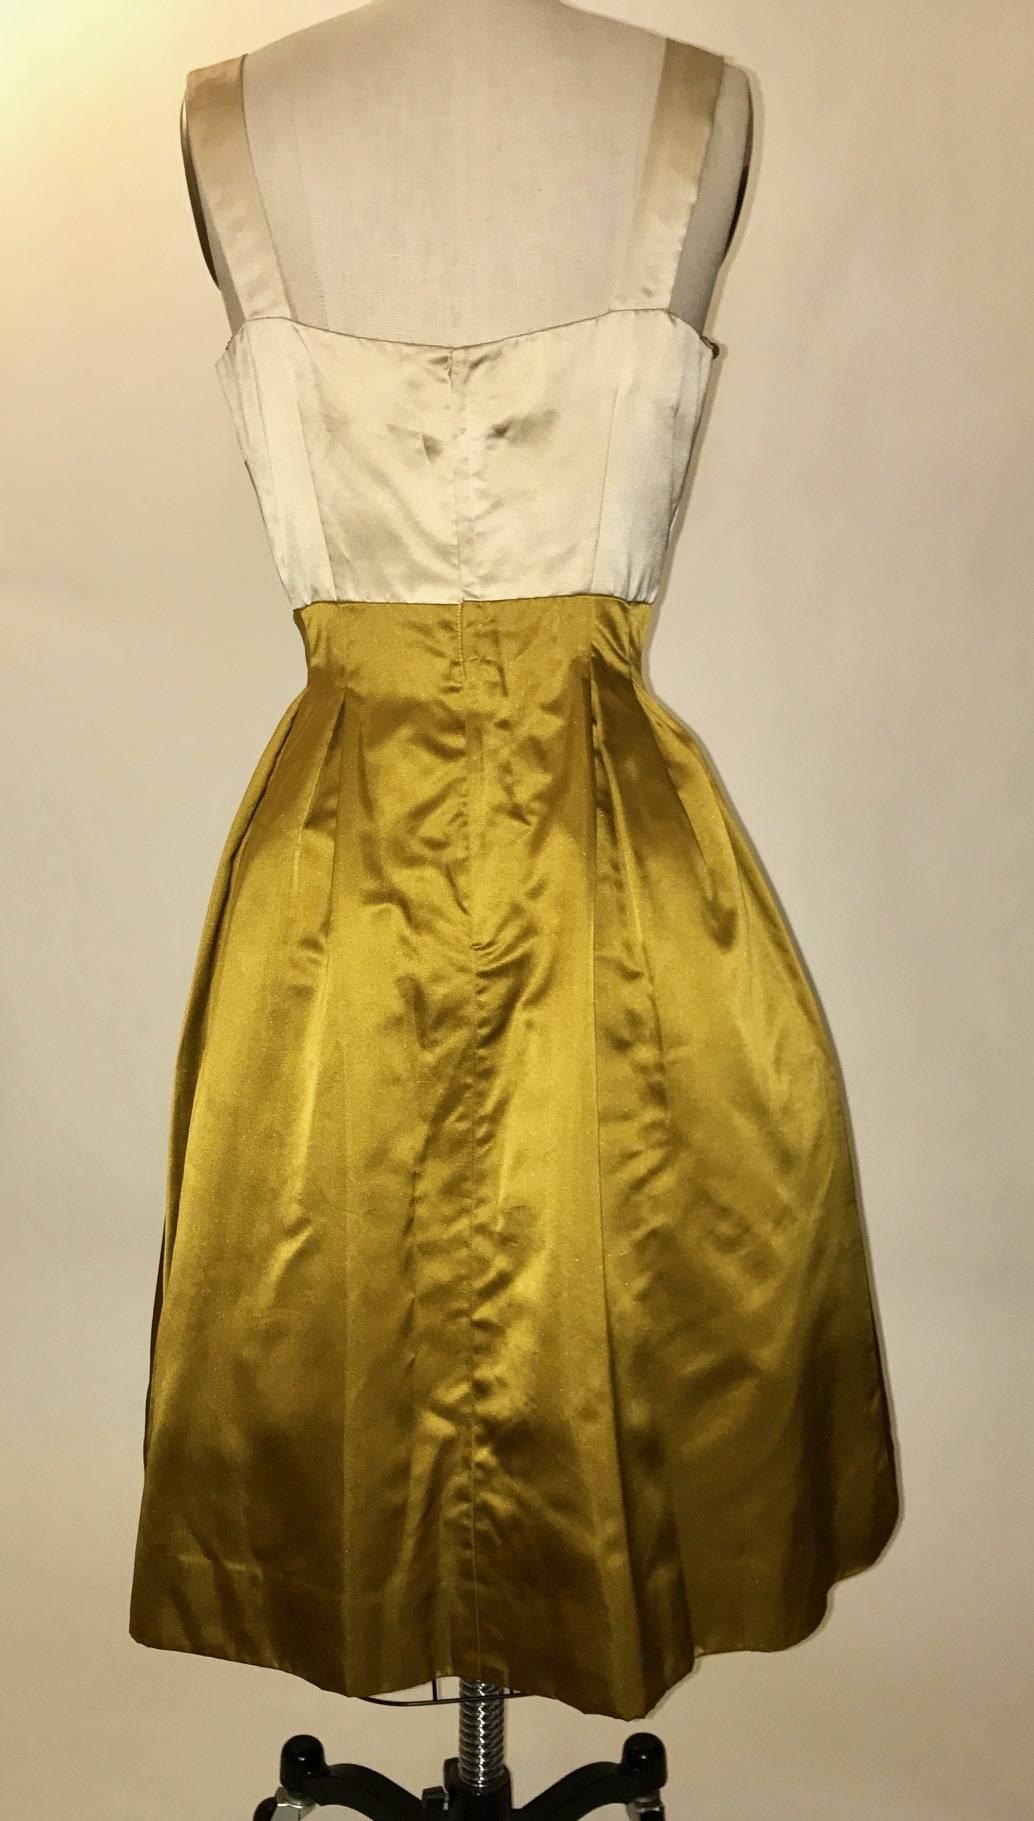 Jean Marchand for Friedlander vintage 1950's silk satin dress with pleated bodice and sweatheart neckline. Beaded trim at neckline and ends of ivory drape detail at skirt. Inverted pleating at waist and mesh tulle underlayer create volume at full